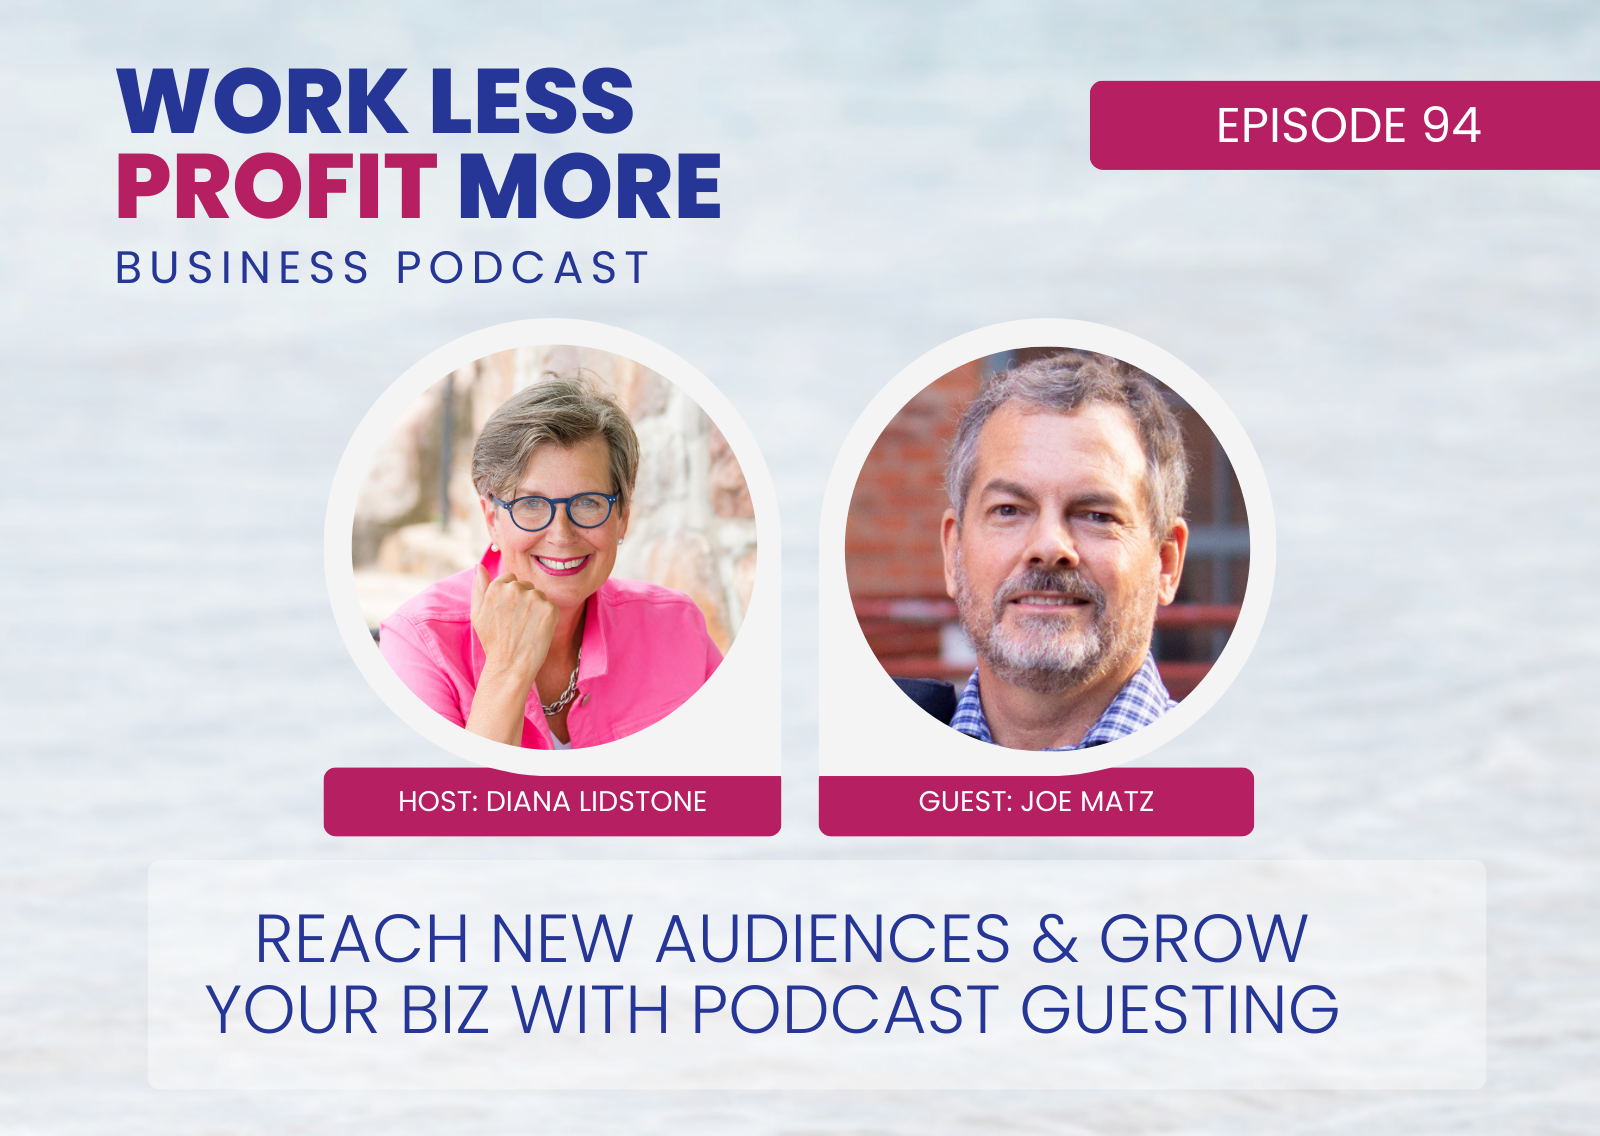 Reach New Audiences & Grow Your Biz with Podcast Guesting Special Guest – Joe Matz